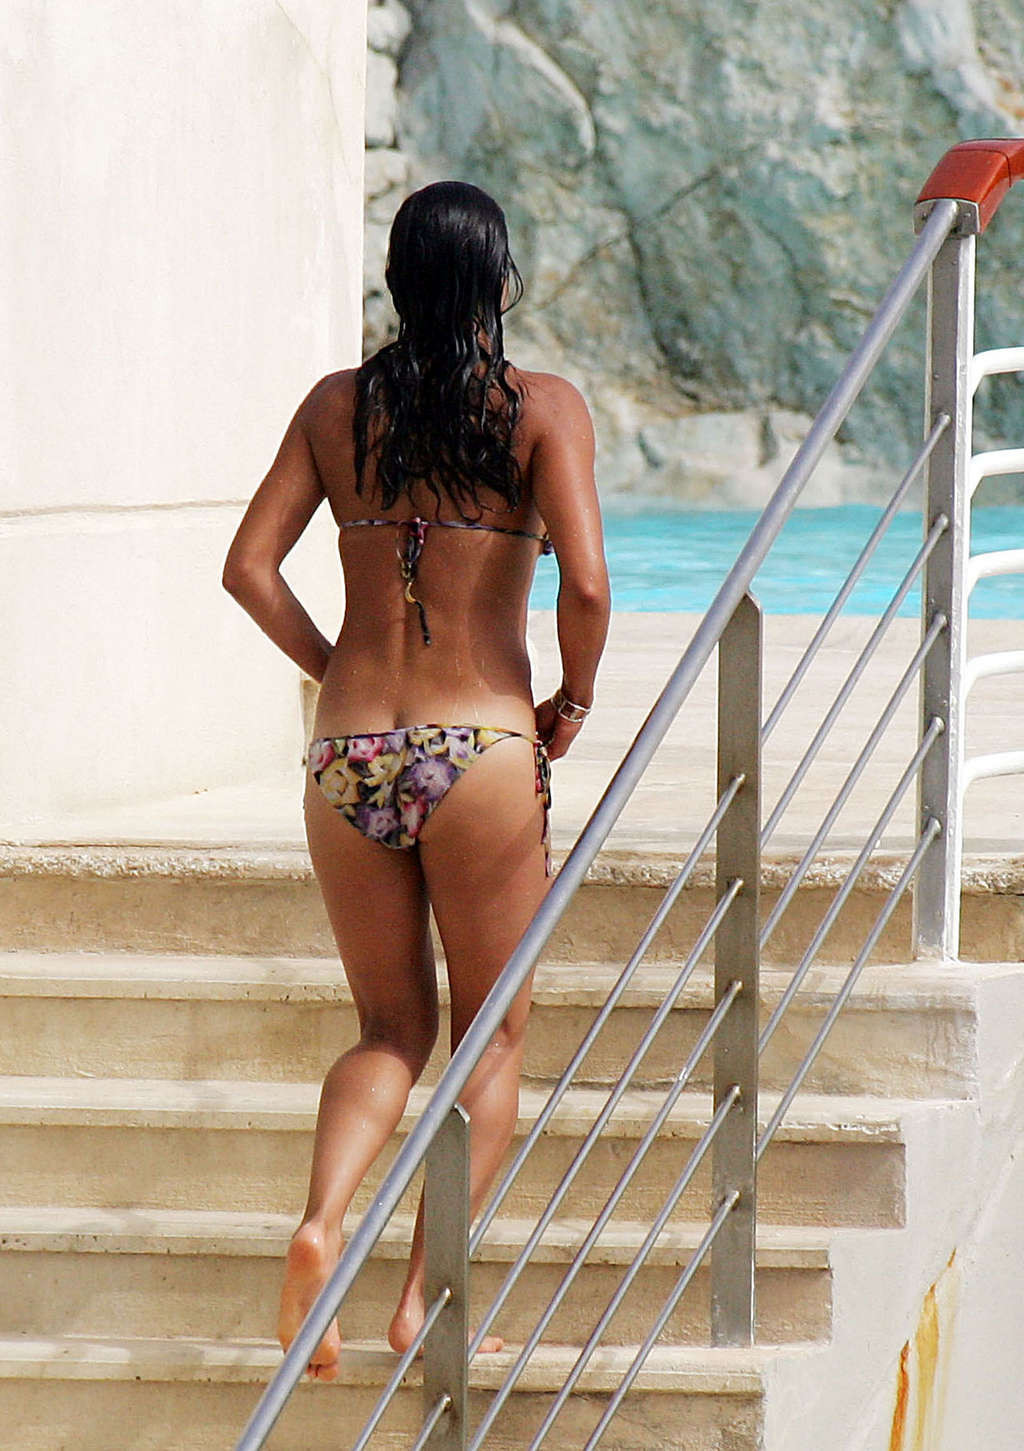 Michelle Rodriguez showing her extraordinary body in bikini very hot photos #75375563